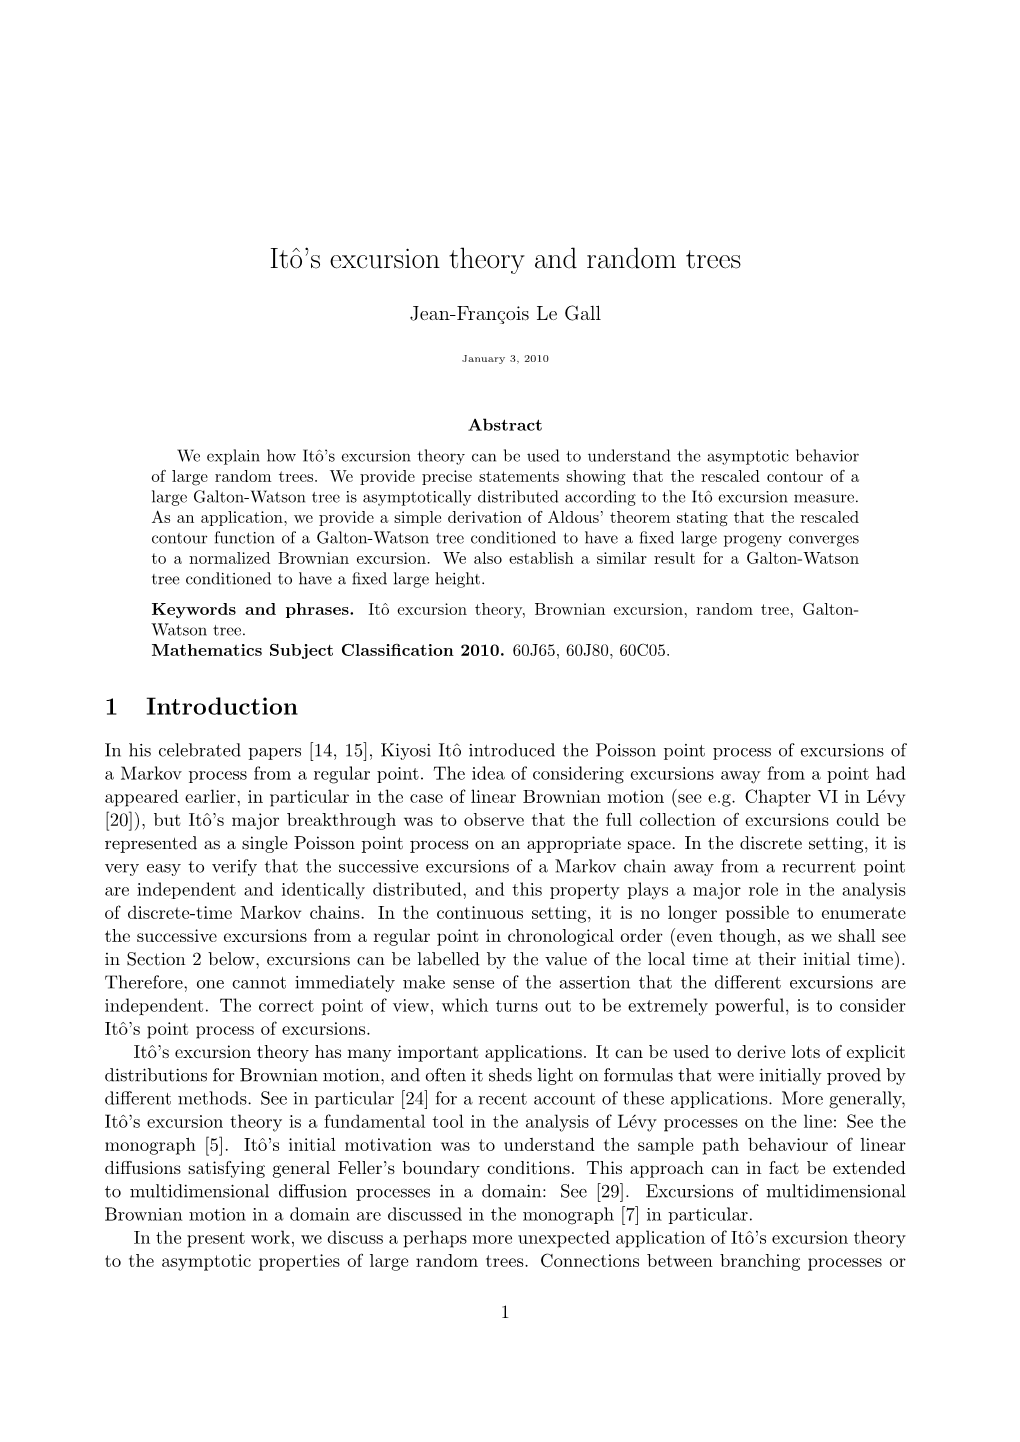 Itô's Excursion Theory and Random Trees